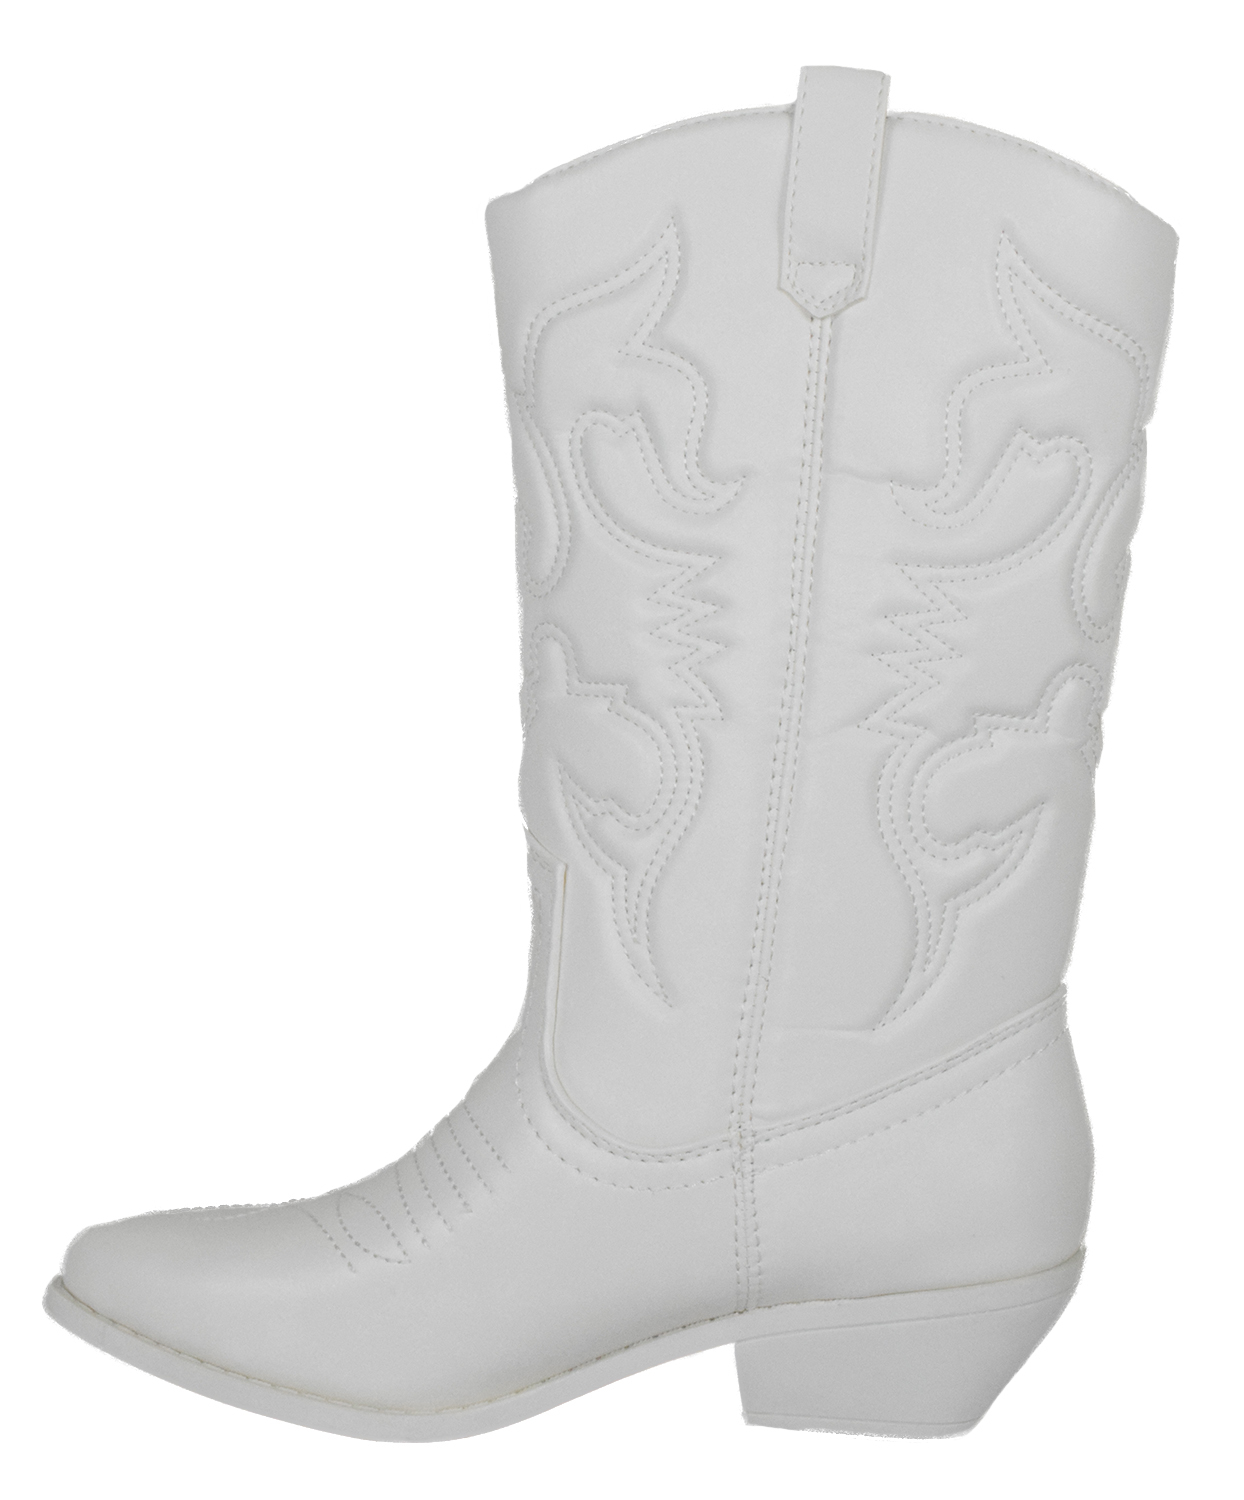 Soda Women Cowgirl Cowboy Western Stitched Boots Pointy Toe Knee High Reno-S All White 10 - image 2 of 2